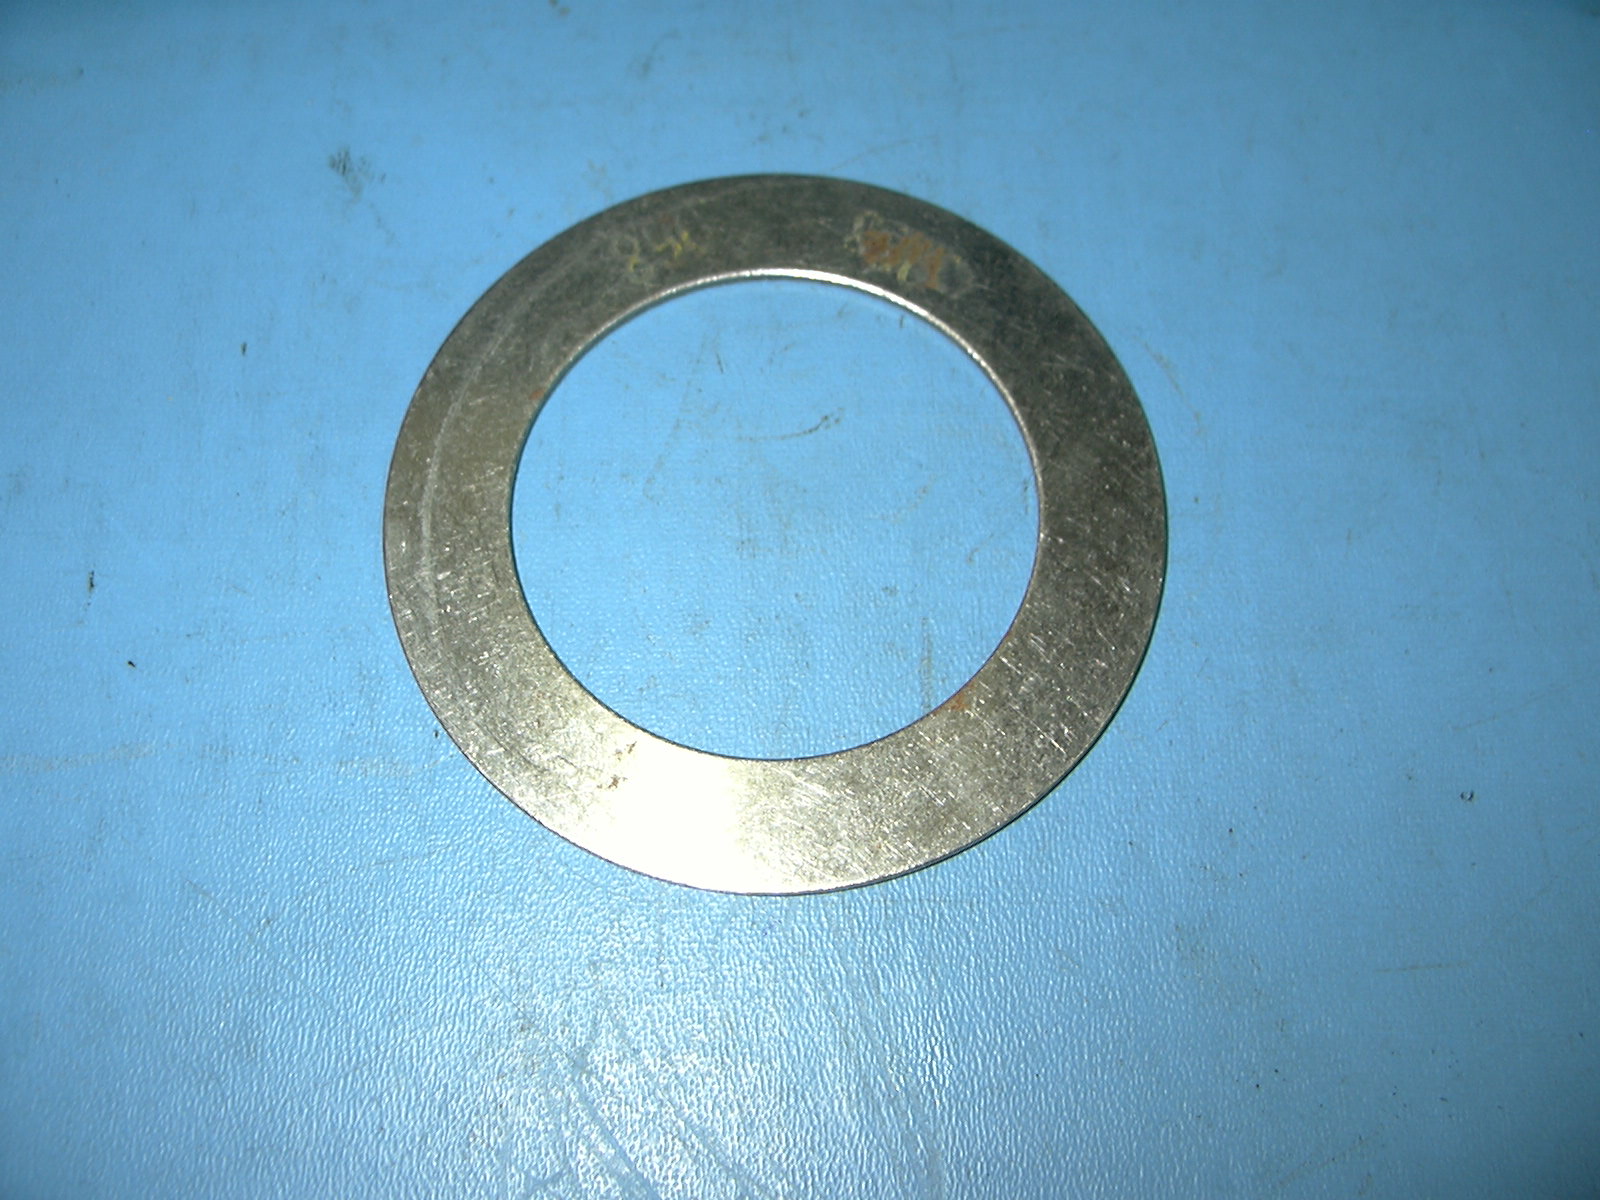 1956 - 1963 GM Differential Side Bearing Shim (0.082" X 2.02" id.) NOS # 1172975. Pic. 1